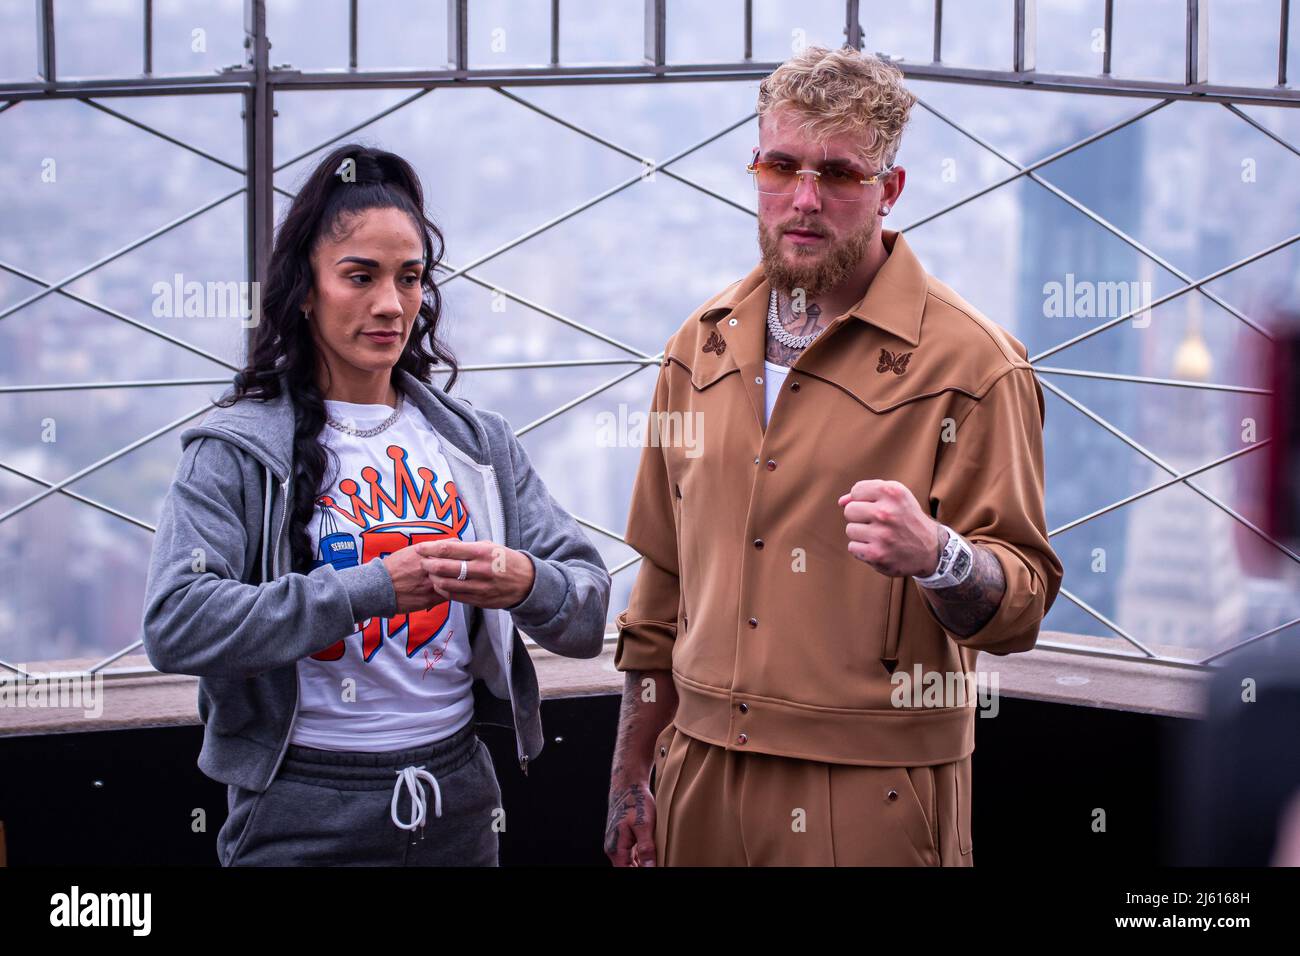 NEW YORK, NY - APRIL 26: (L-R) Amanda Serrano stands with Jake Paul atop the Empire State Building after the todays face off ahead of their Undisputed Title Fight on Saturday night (April 30) at Madison Square Garden on April 26, 2022 in New York, NY, United States. (Photo by Matt Davies/PxImages) Credit: Px Images/Alamy Live News Stock Photo